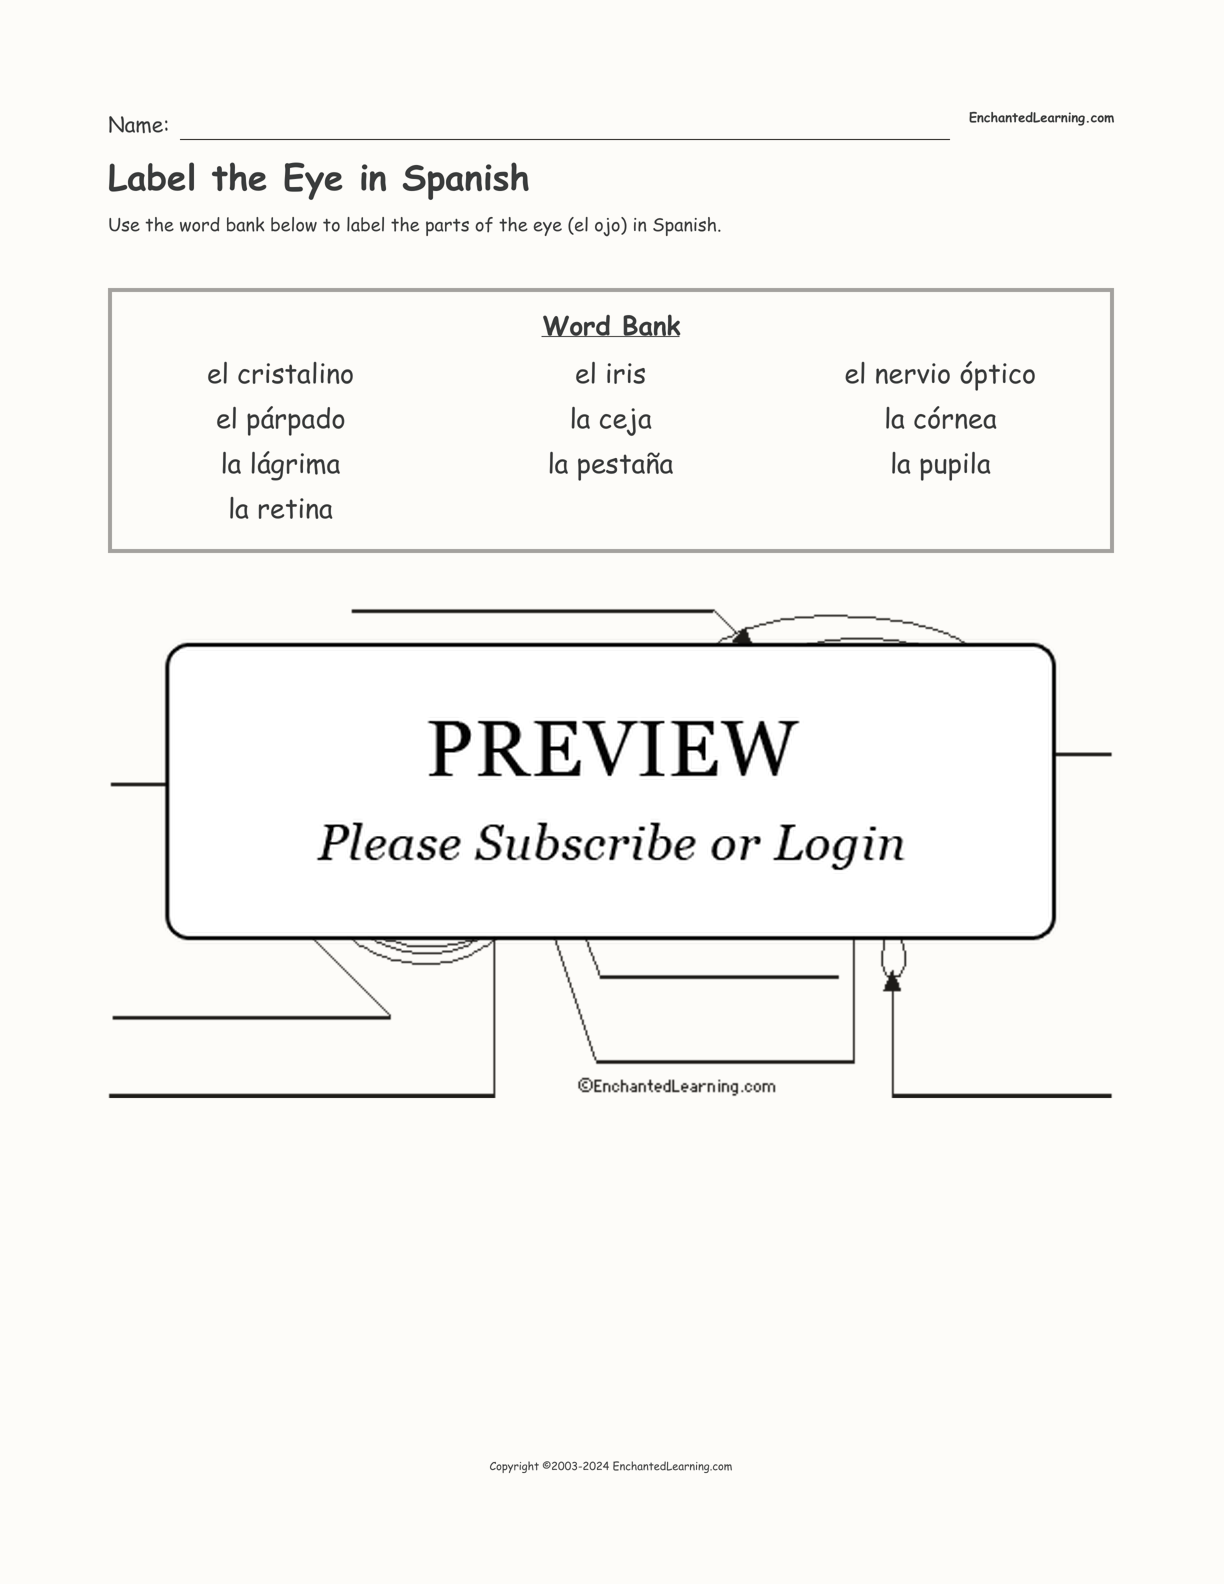 Label the Eye in Spanish interactive worksheet page 1